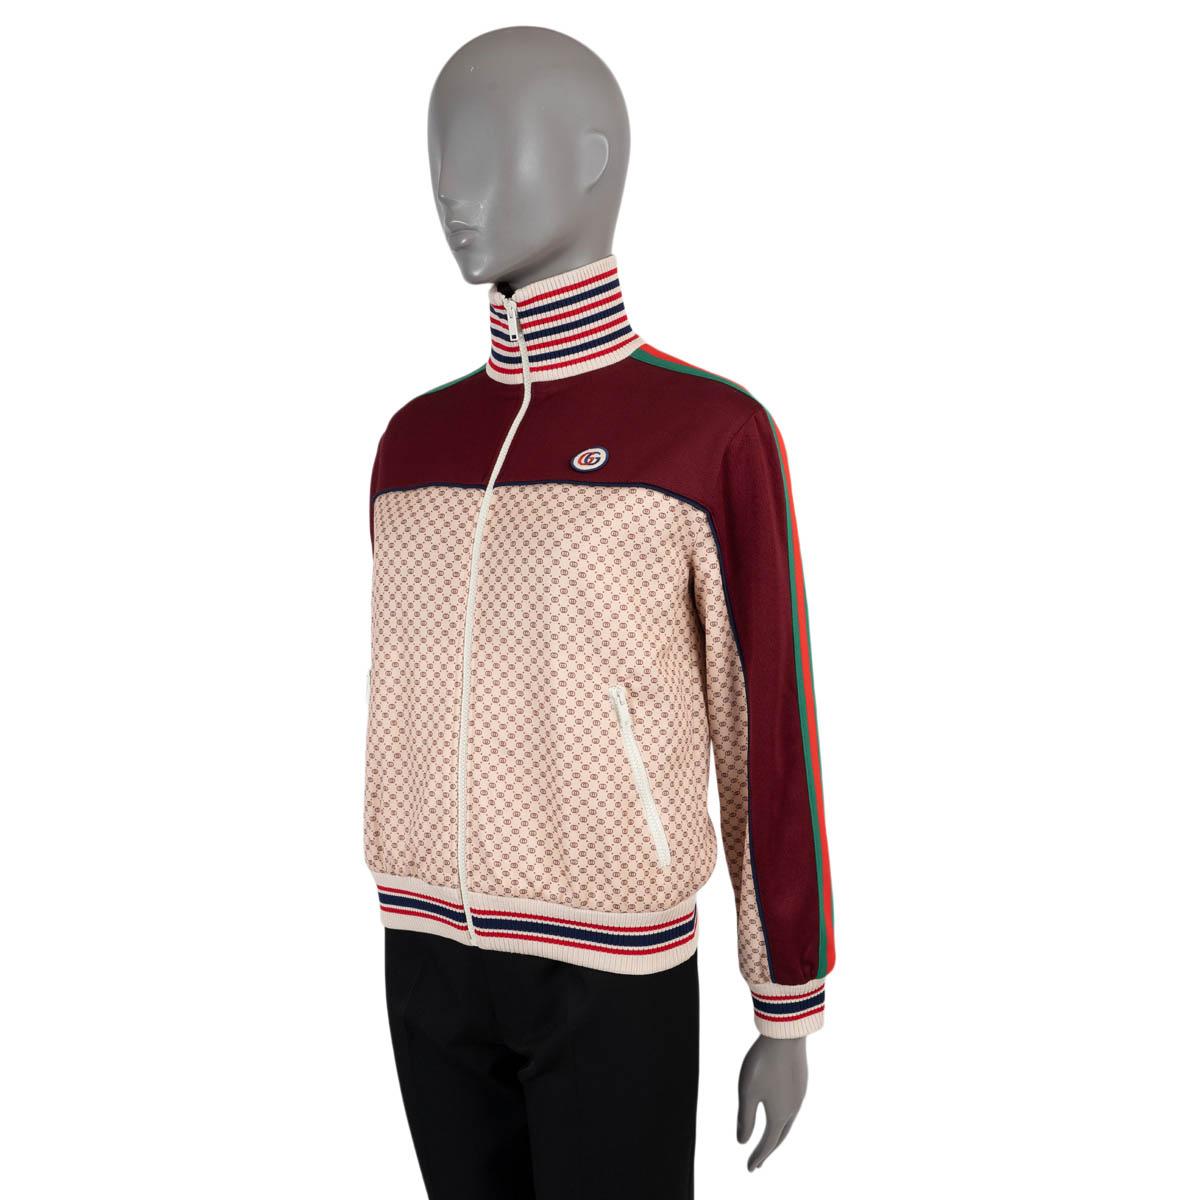 100% authentic Gucci panelled track jacket in burgundy and beige monogram polyester (55%) and cotton (45%). Features a high-neck, striped rib-knit trims, a GG patch and two zipper pockets at the waist. Closes with a contrast white zipper. Unlined.